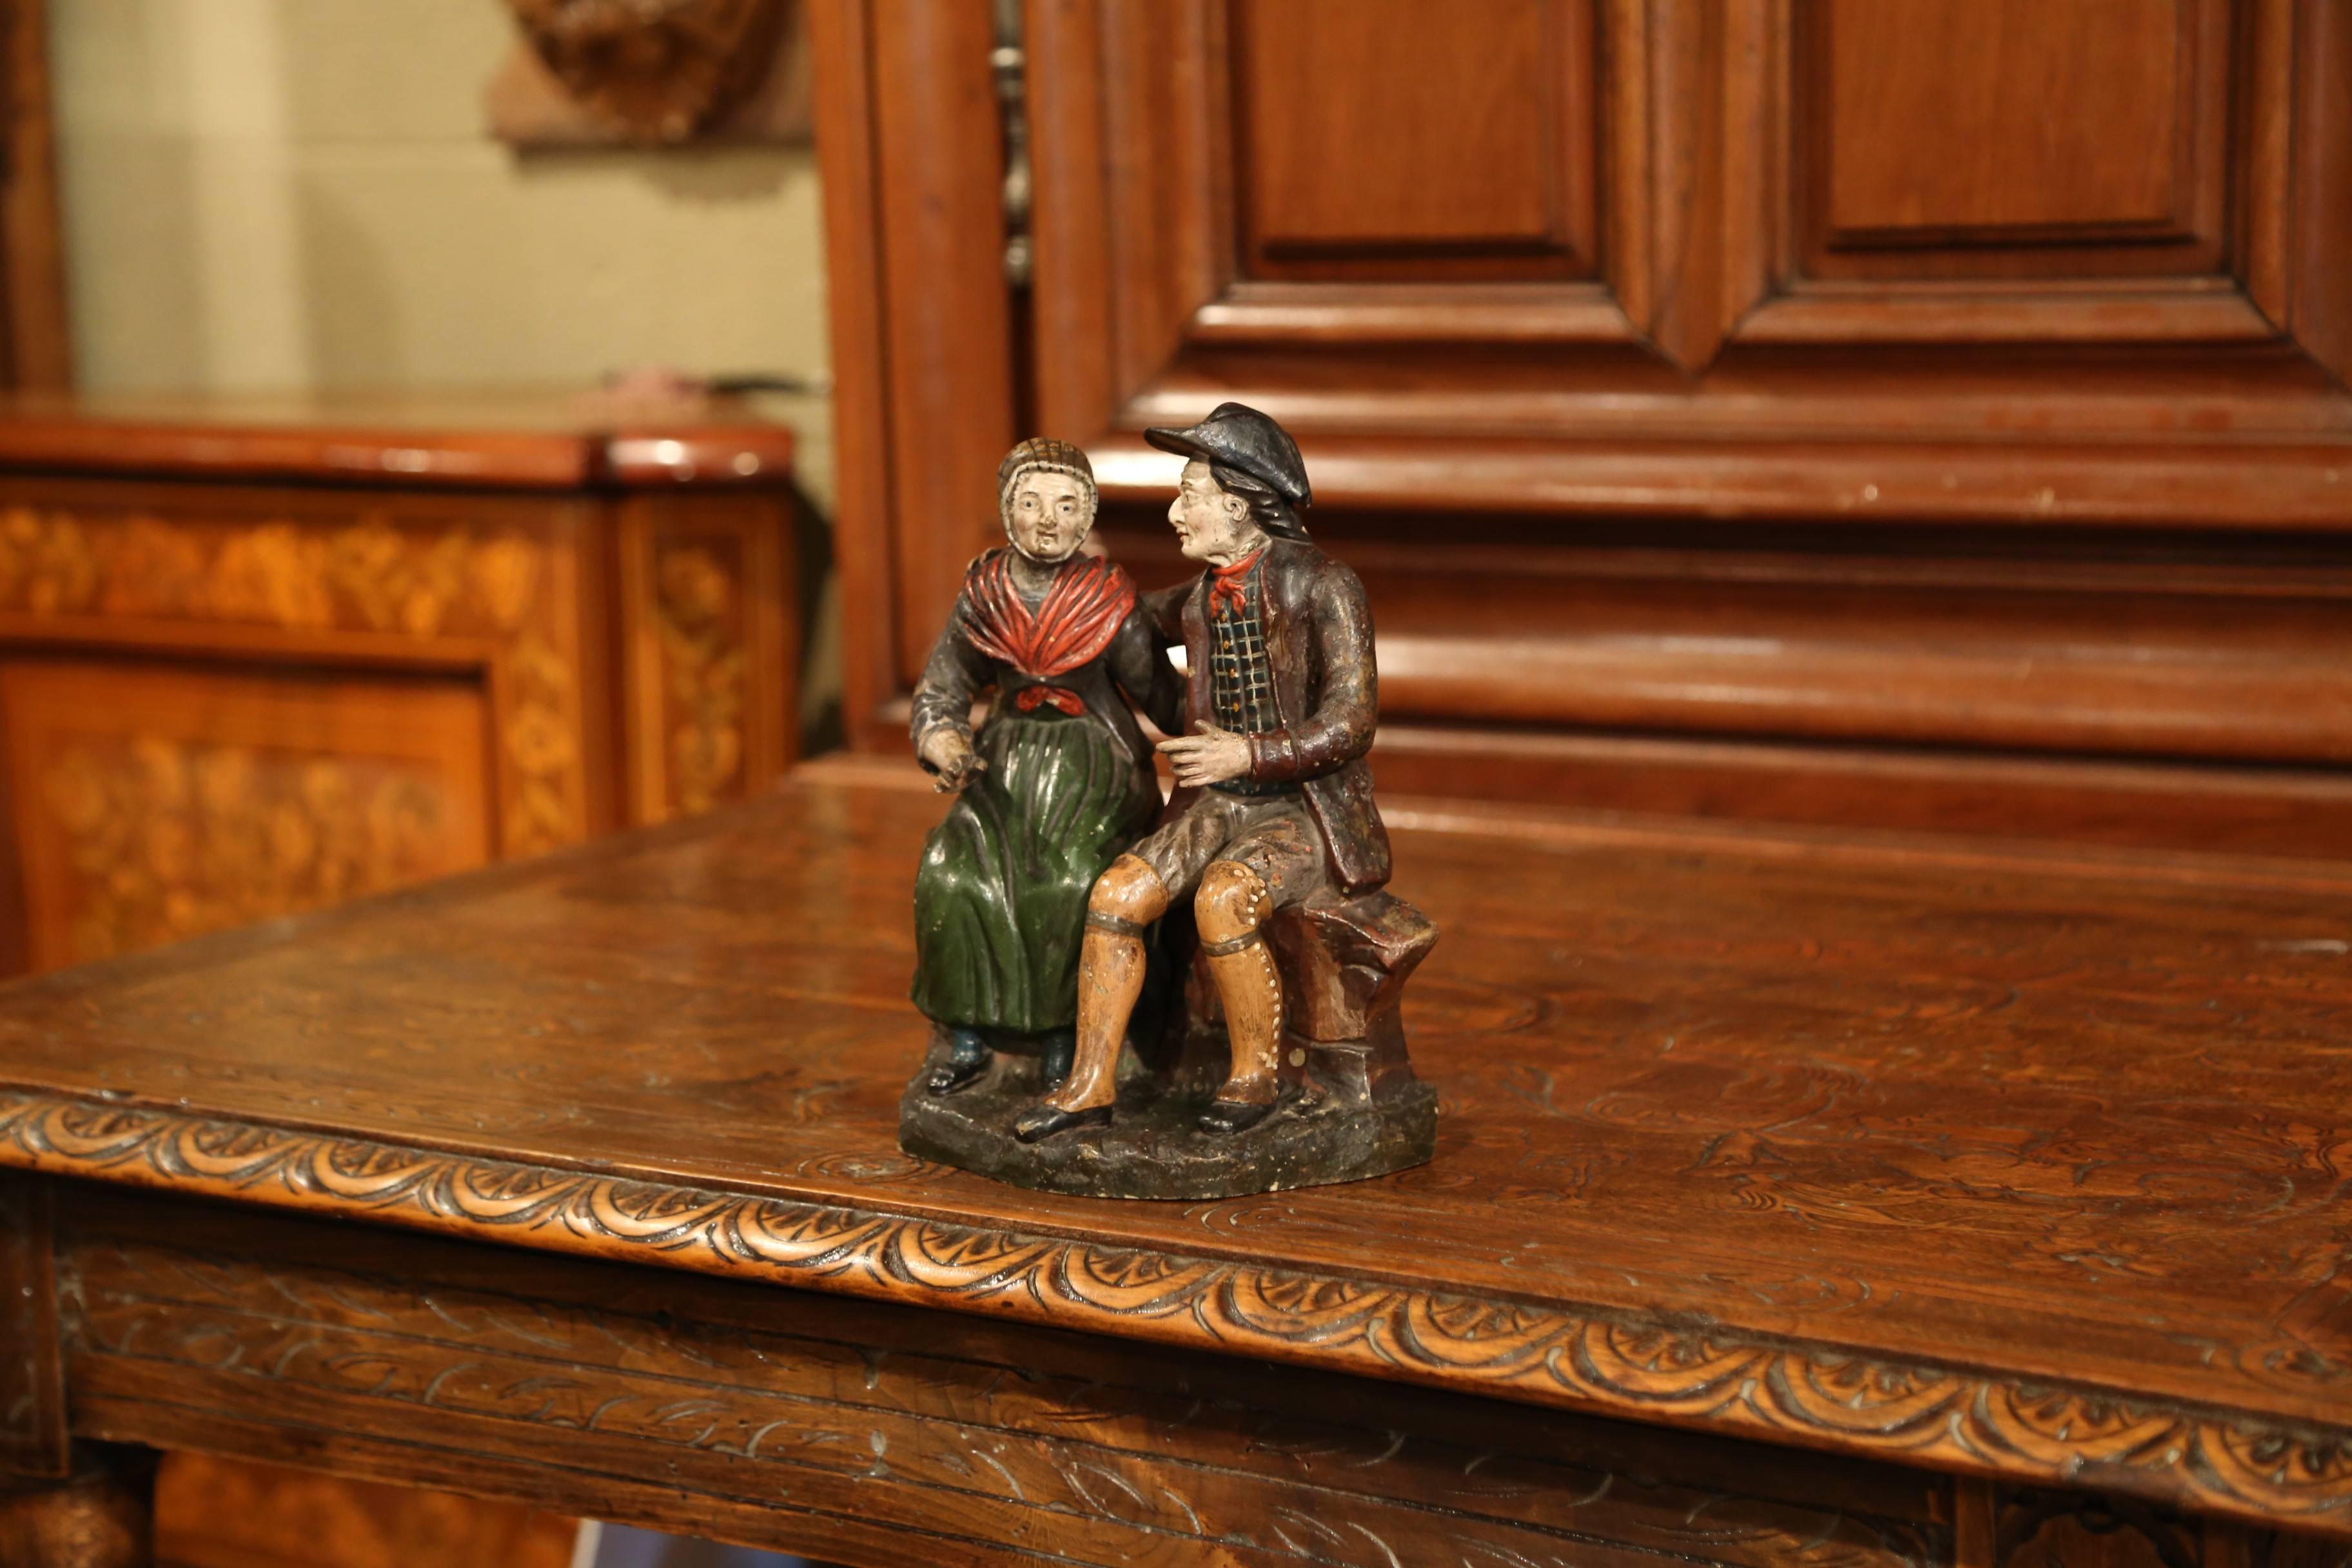 Place this antique colorful terracotta sculpture on a shelf in your family room; crafted circa 1920, the ceramic piece features a older couple seated on a bench and holding each other. Excellent condition with rich patinated colors.
Measures: 7